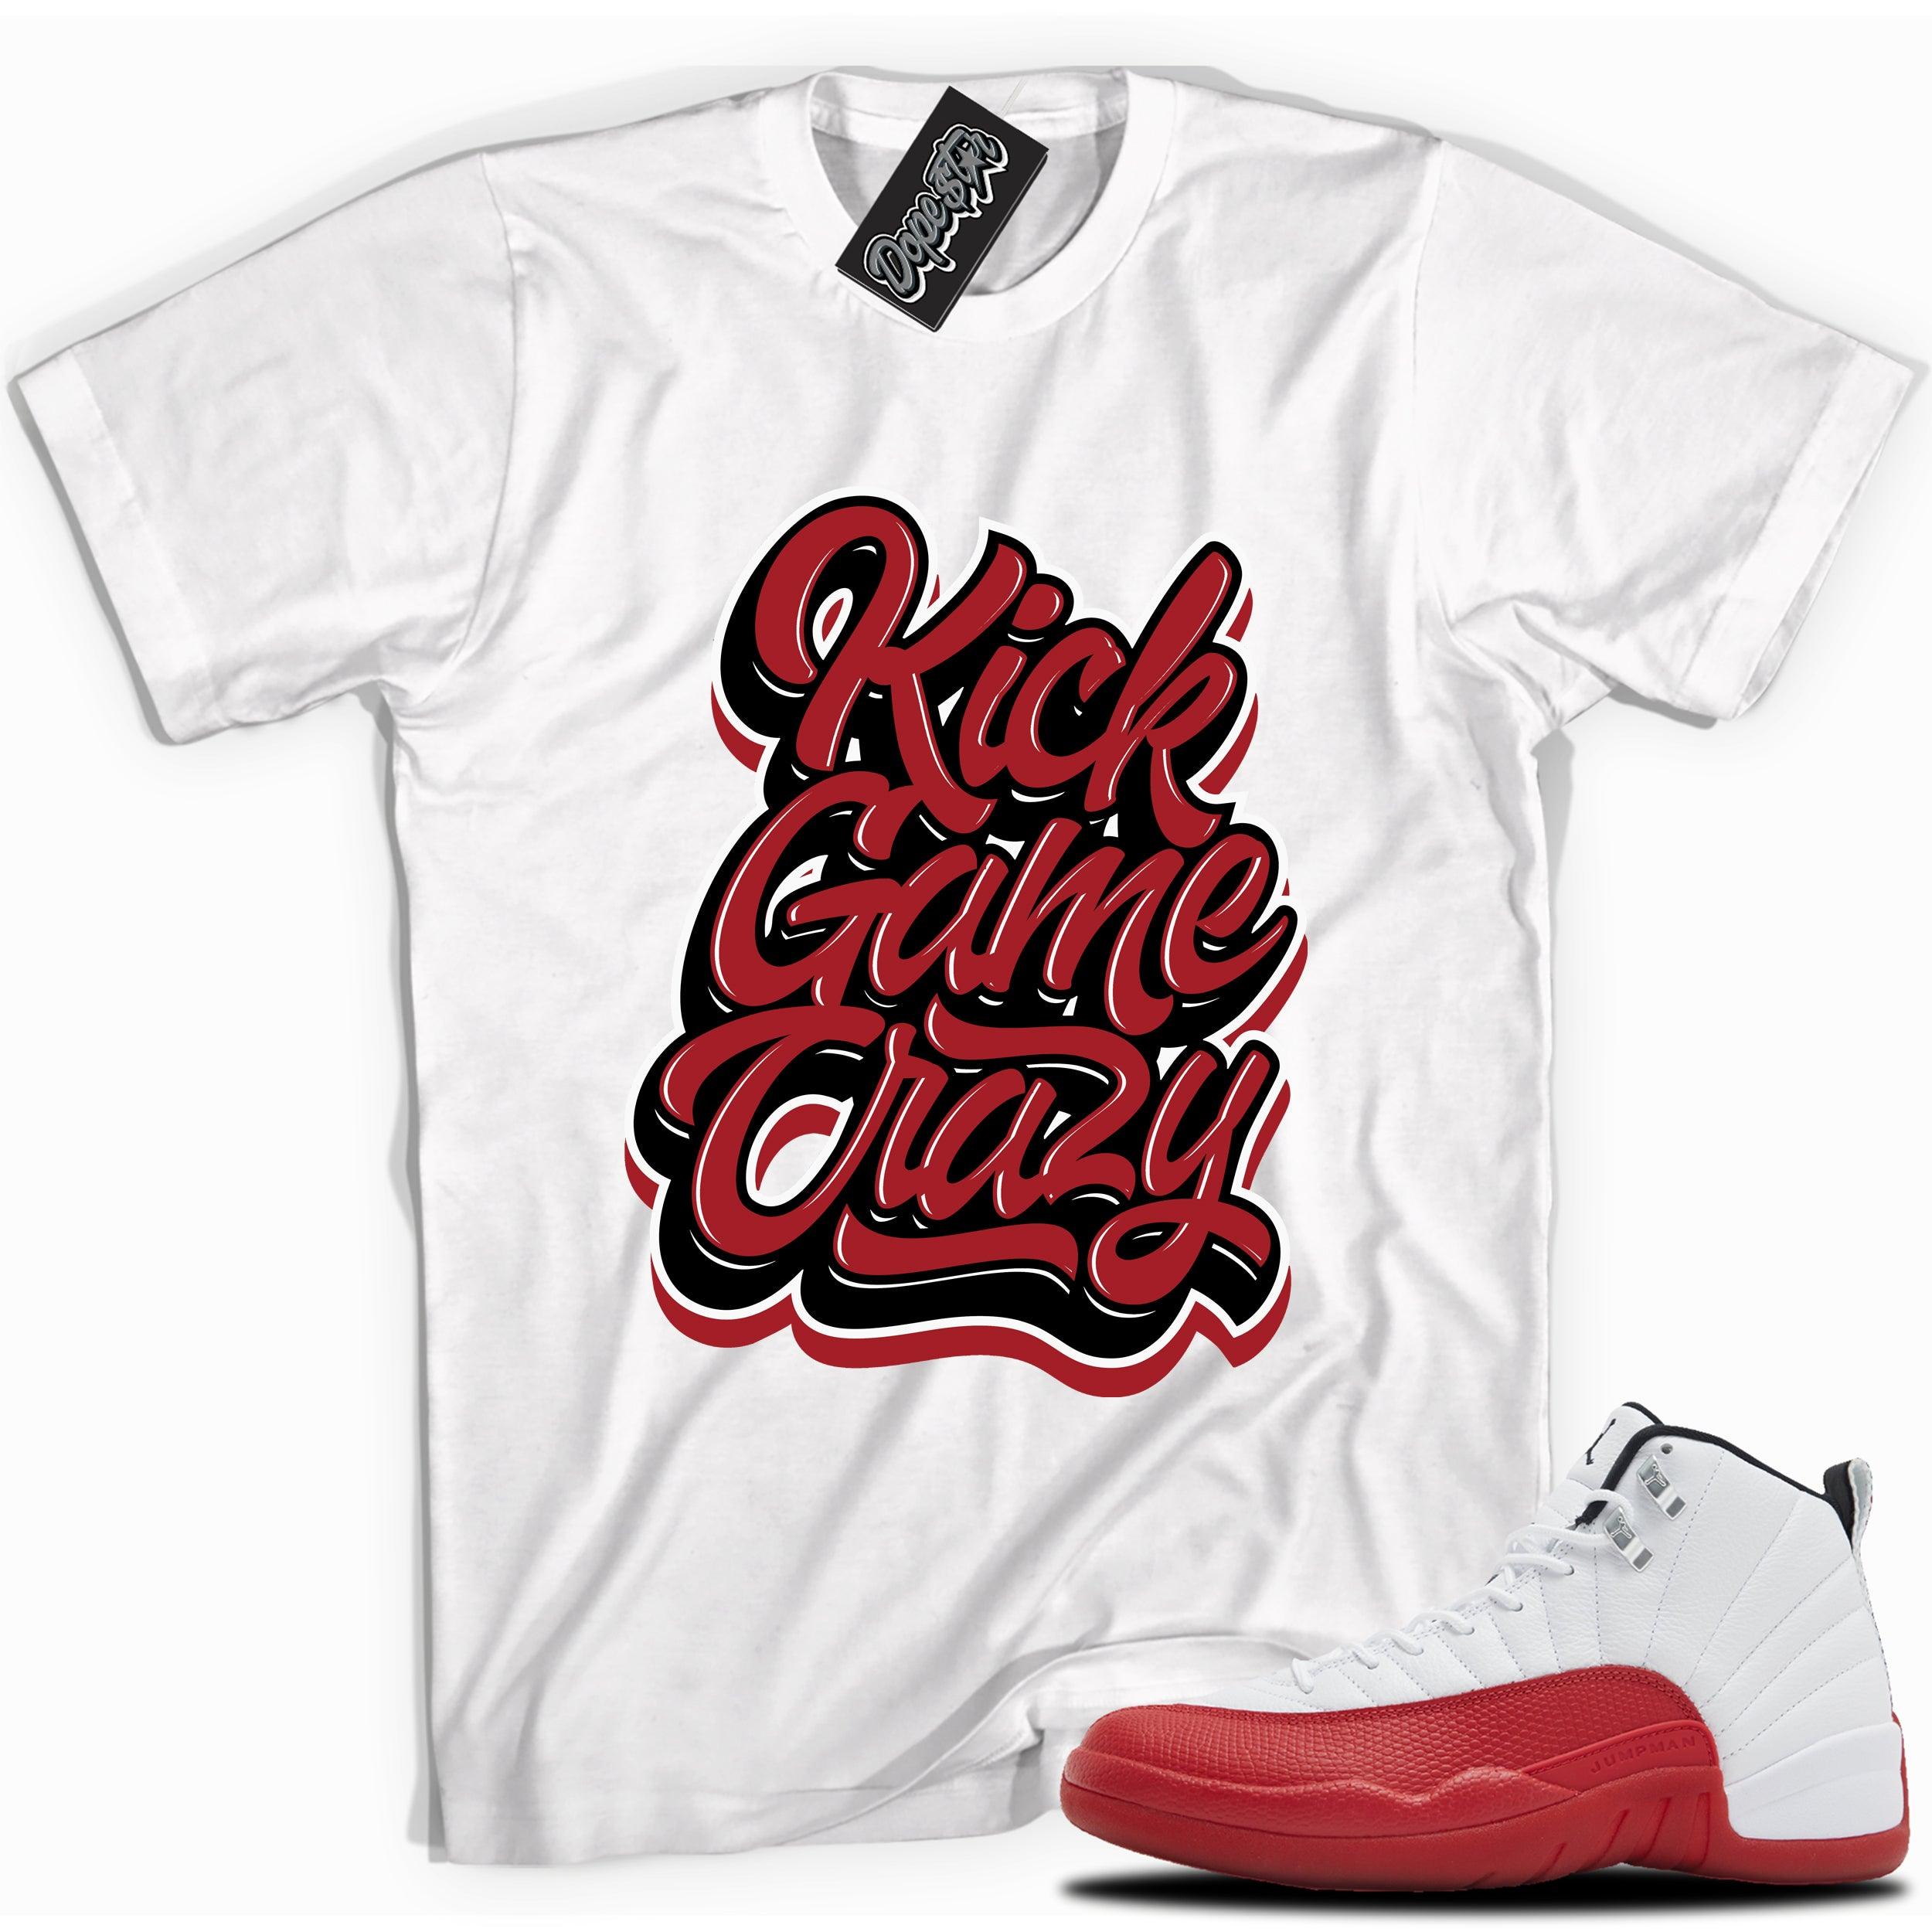 Cool White graphic tee with “ Kick Game Crazy” print, that perfectly matches Air Jordan 12 Retro Cherry Red 2023 red and white sneakers 